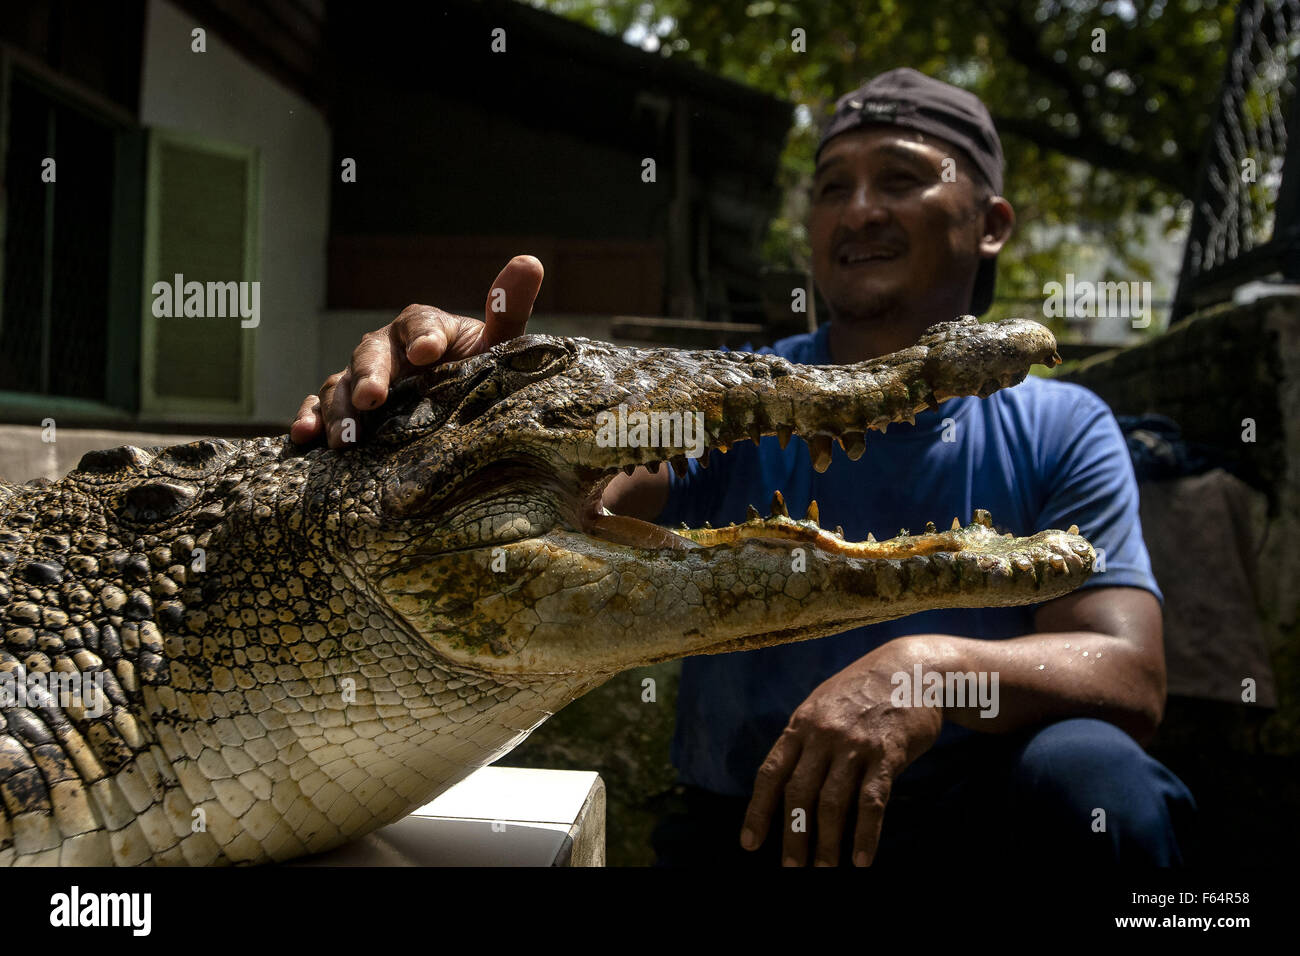 Medan, Indonesia. 11th Nov, 2015. A crocodile handler and his crocodile wait for food at a crocodile enclosure in Medan, Indonesia, Nov. 11, 2015. Indonesia's anti-drug chief Budi Waseso has proposed to build a prison guarded by crocodiles on an island to house death row of drug convicts, an official said. © Tanto H./Xinhua/Alamy Live News Stock Photo